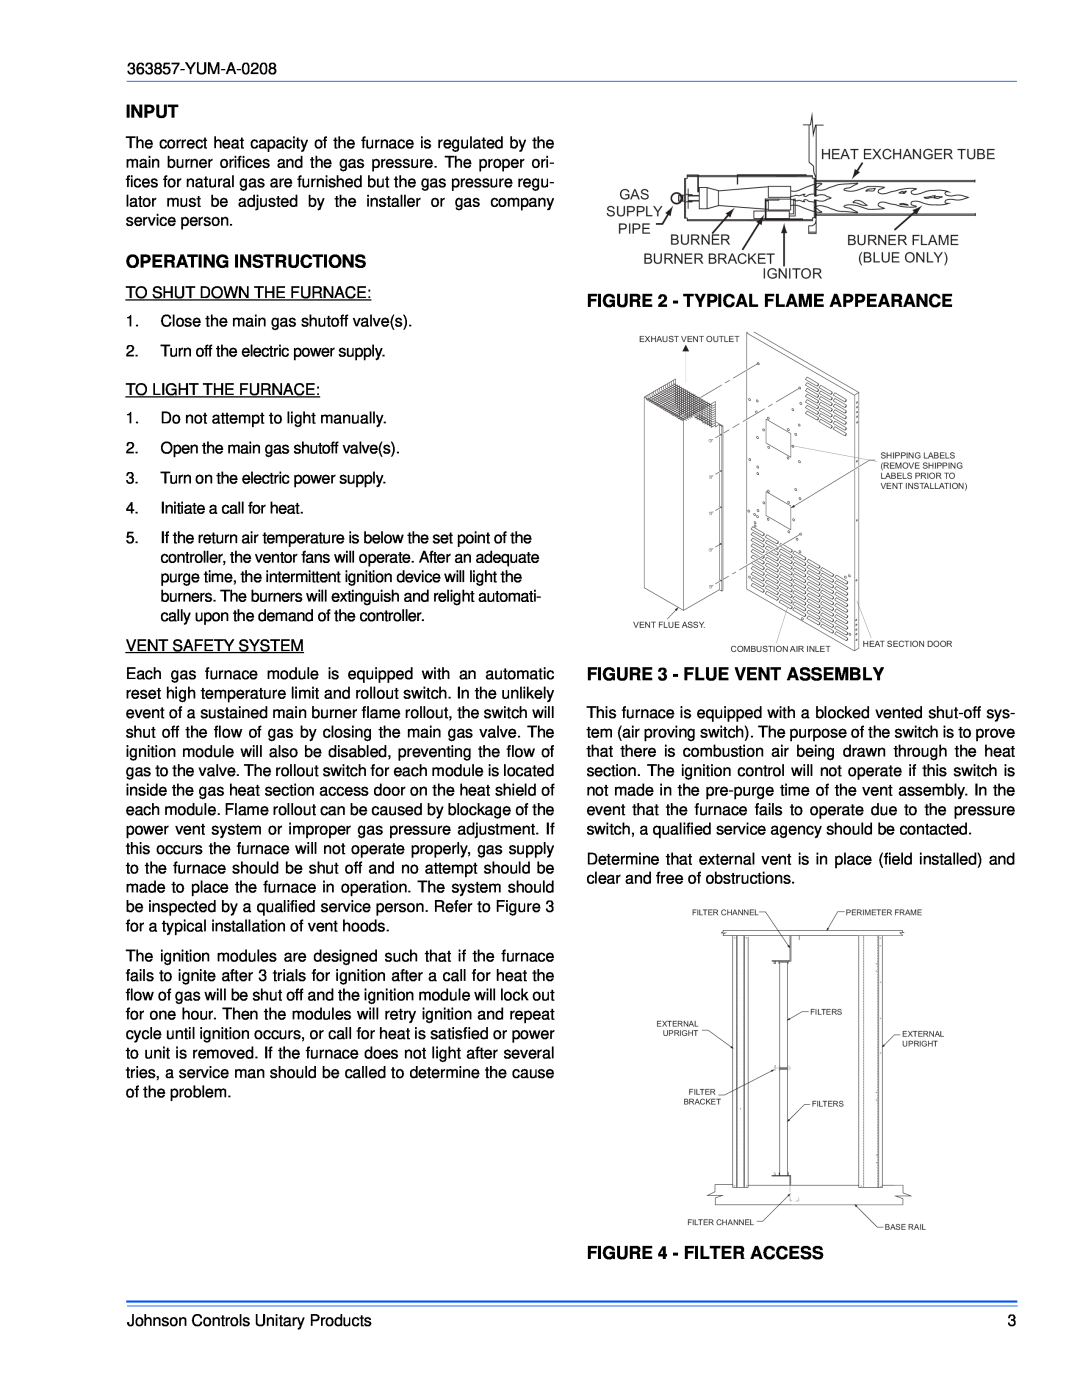 York 363857-YUM-A-0208 manual Input, Operating Instructions, Typical Flame Appearance, Flue Vent Assembly, Filter Access 